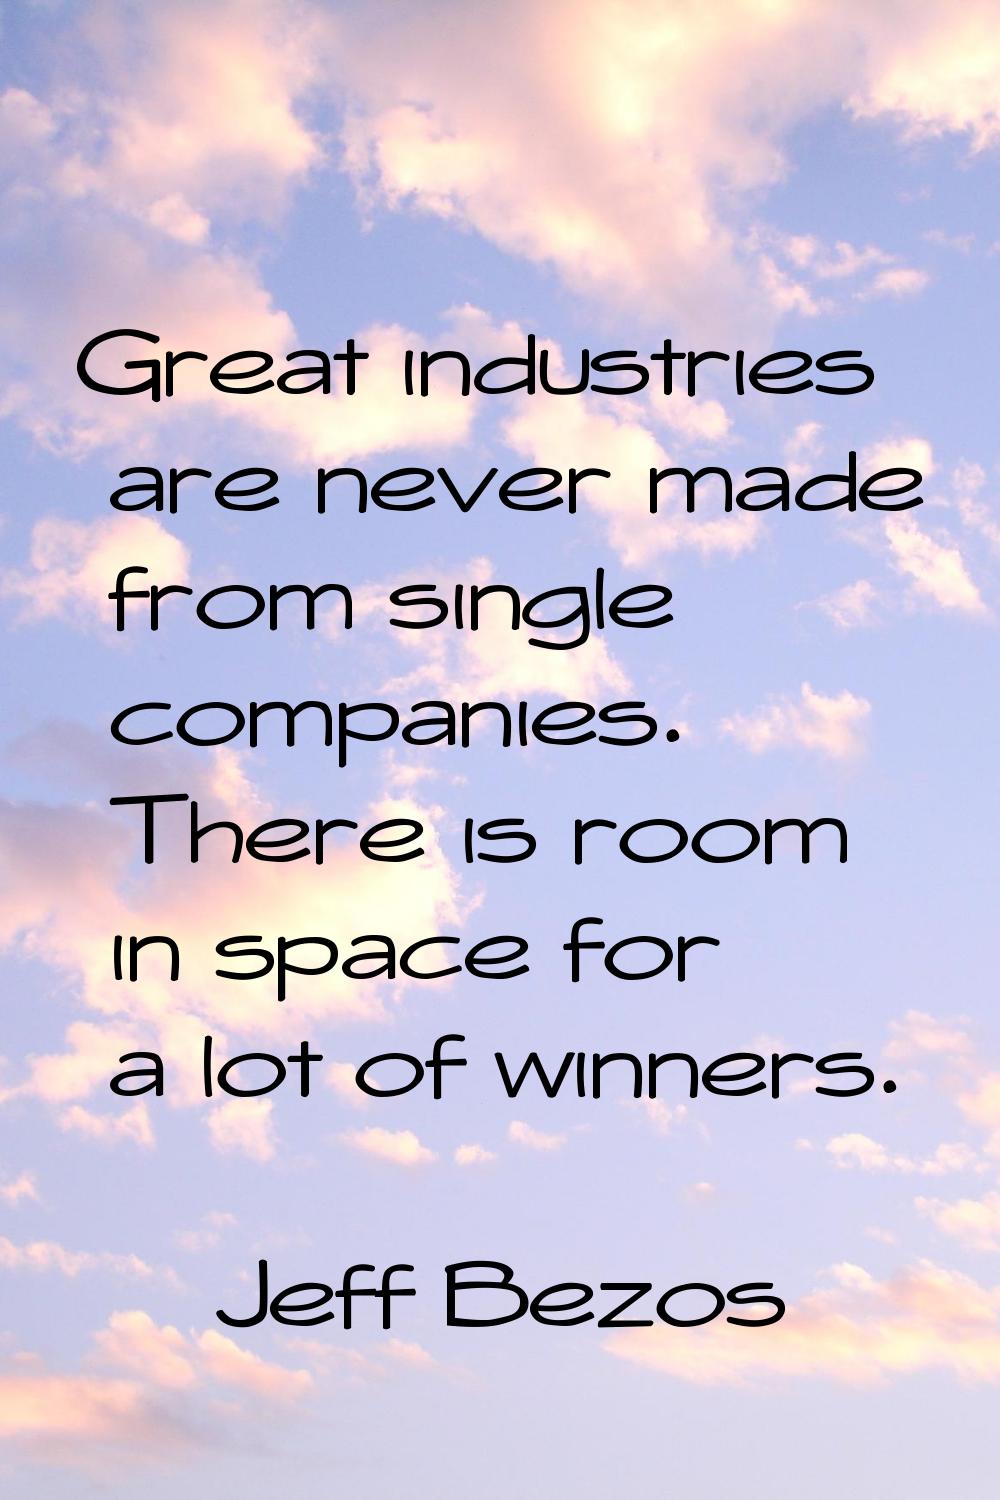 Great industries are never made from single companies. There is room in space for a lot of winners.